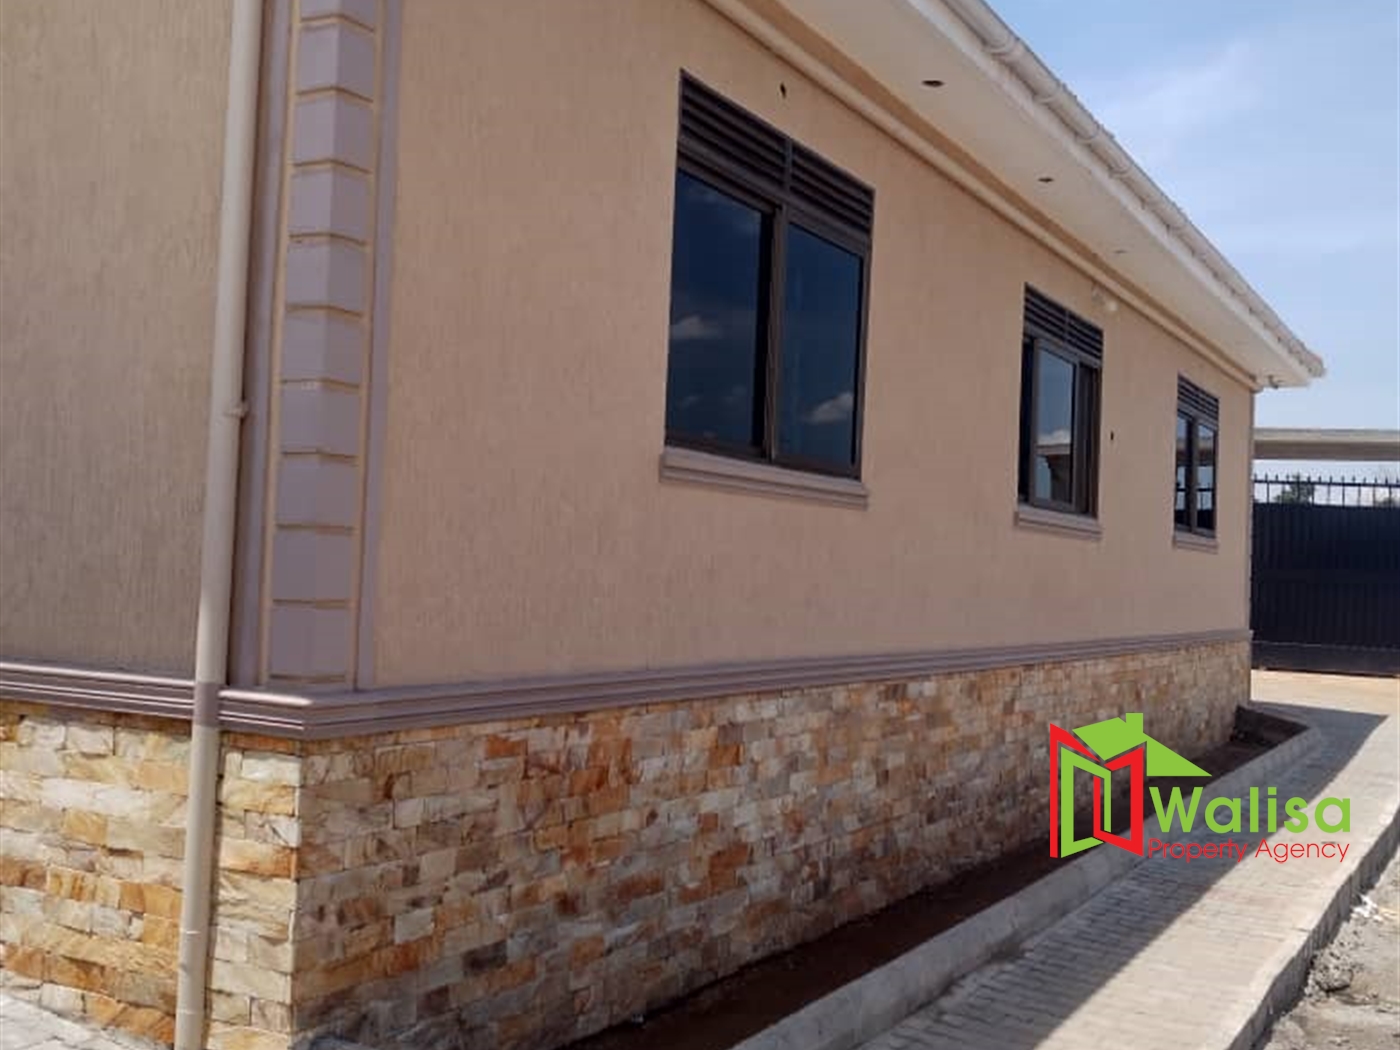 Town House for sale in Buyala Mityana